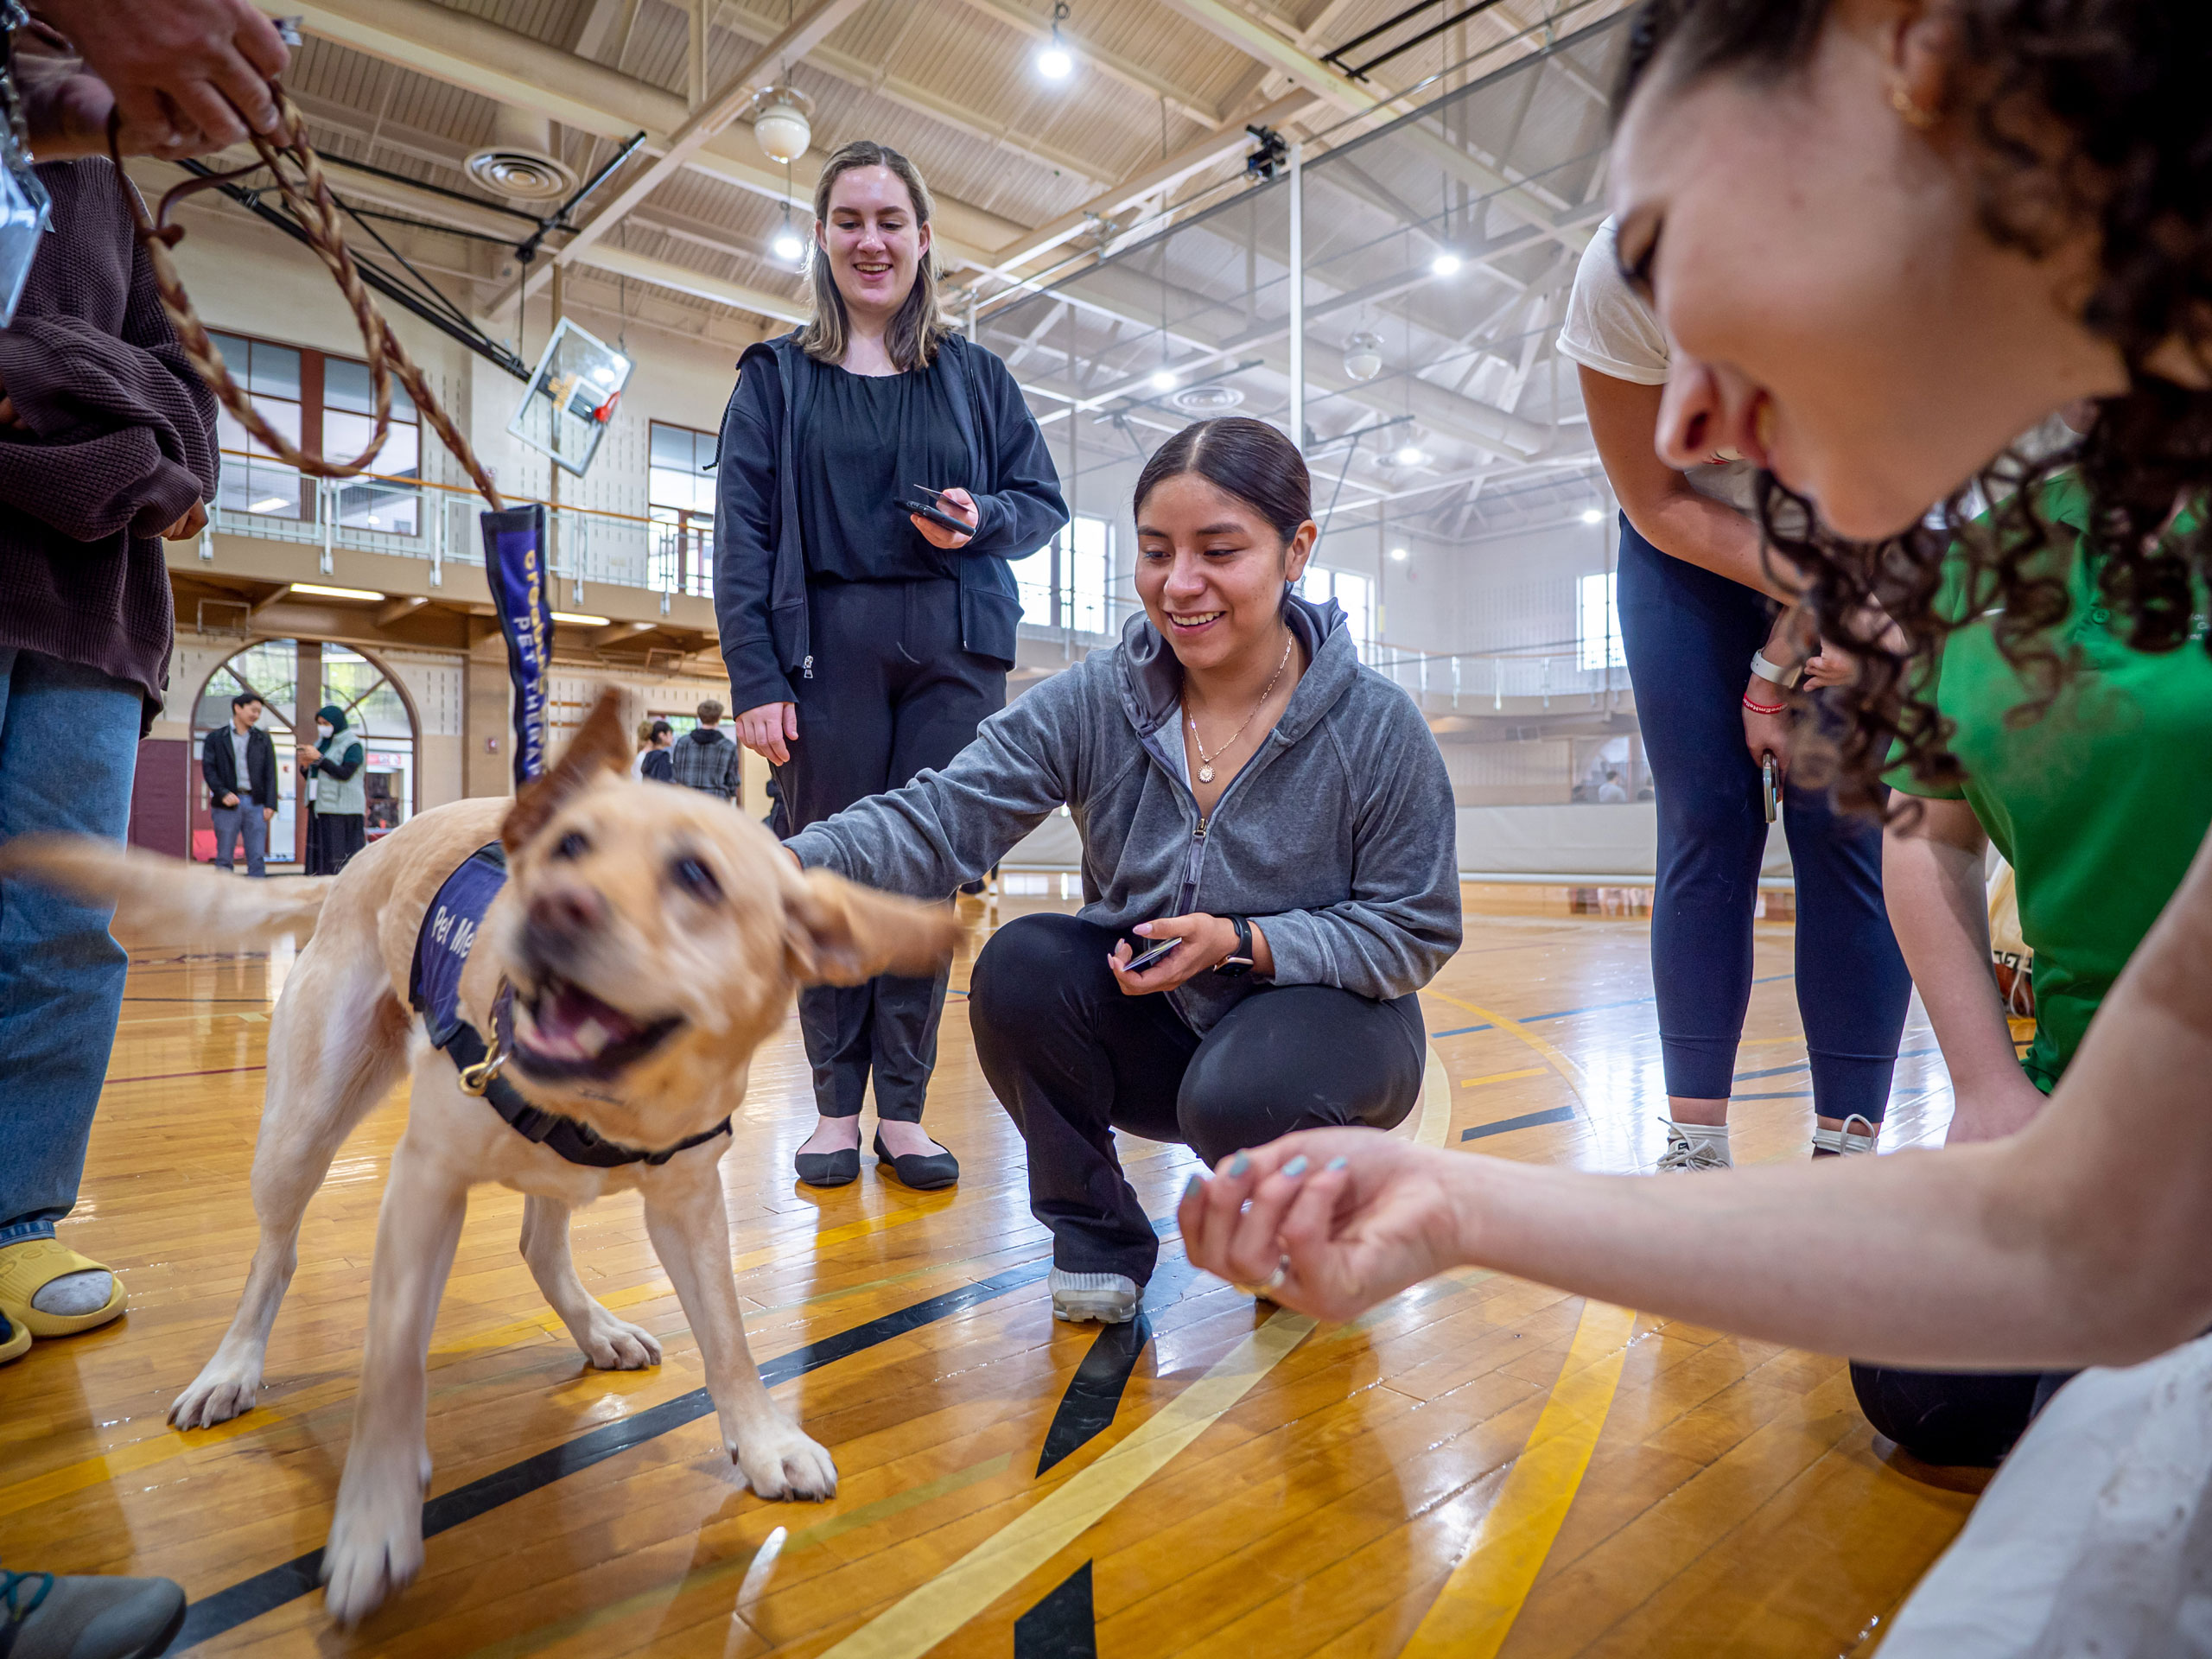 A dog wags its head and tail as smiling students each out to pet it.